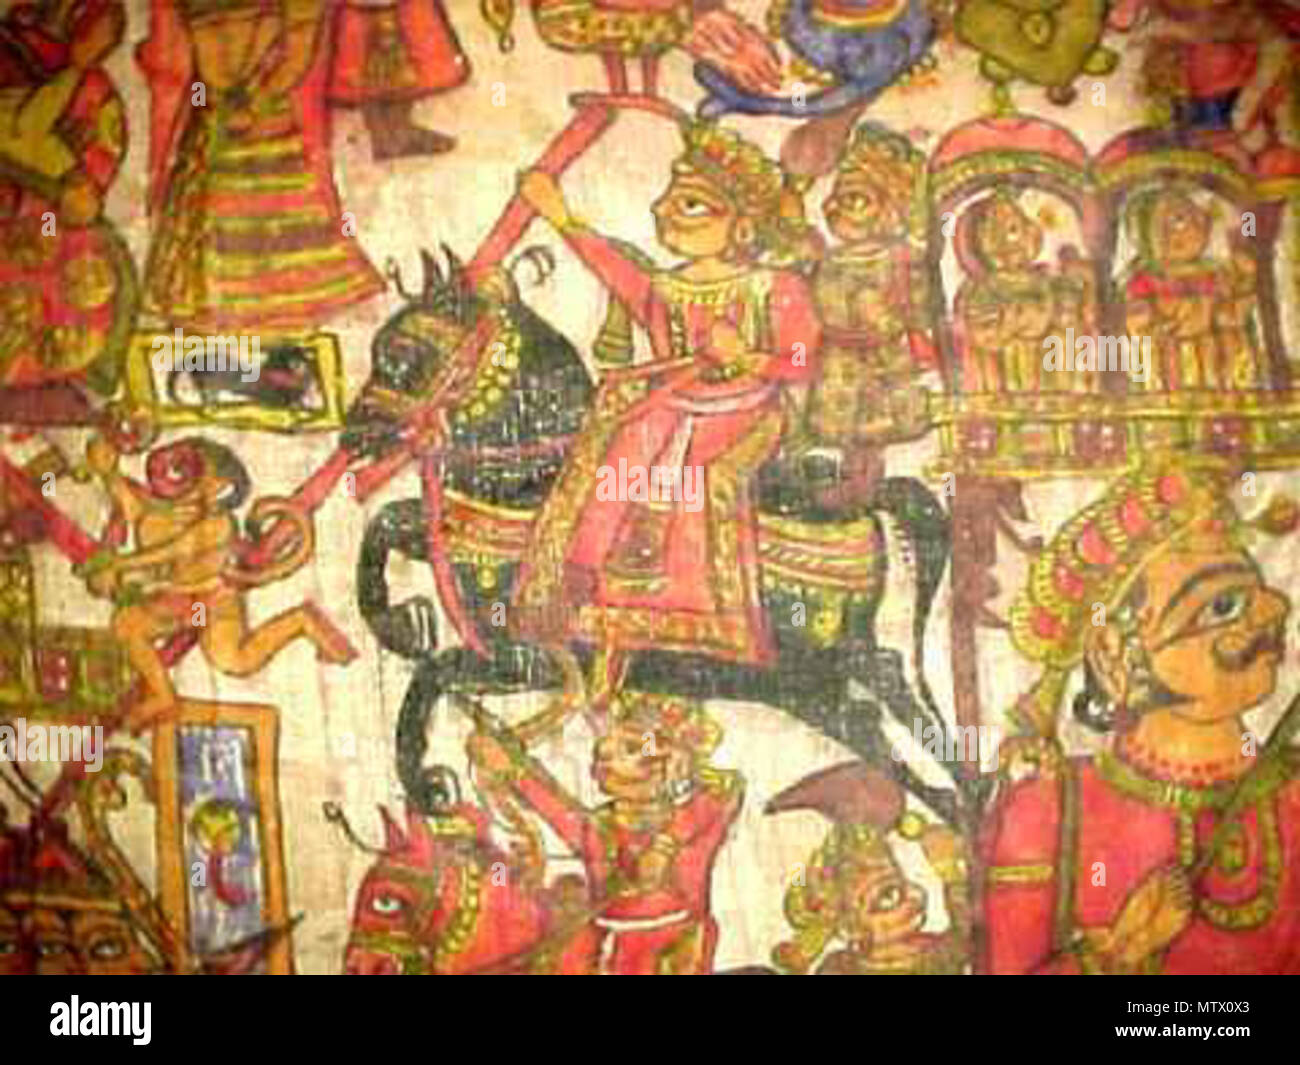 . English: A series of images of another par of Pabuji, this one from the early 19th century Source: ebay, April 2002 'This is an old (mid 1800s or earlier) Par. The painted textile is approximately 16 feet long and 55 1/2 inches wide. The story painting has been used to relay the story many times through the years and shows normal wear, especially on the bottom edge. There are some old repairs. The textile is made of two narrow pieces ( 26 3/4') sewen together. It appears to be an old linen-type material.' . early 19th century. Unknown 462 Pabuji2g Stock Photo